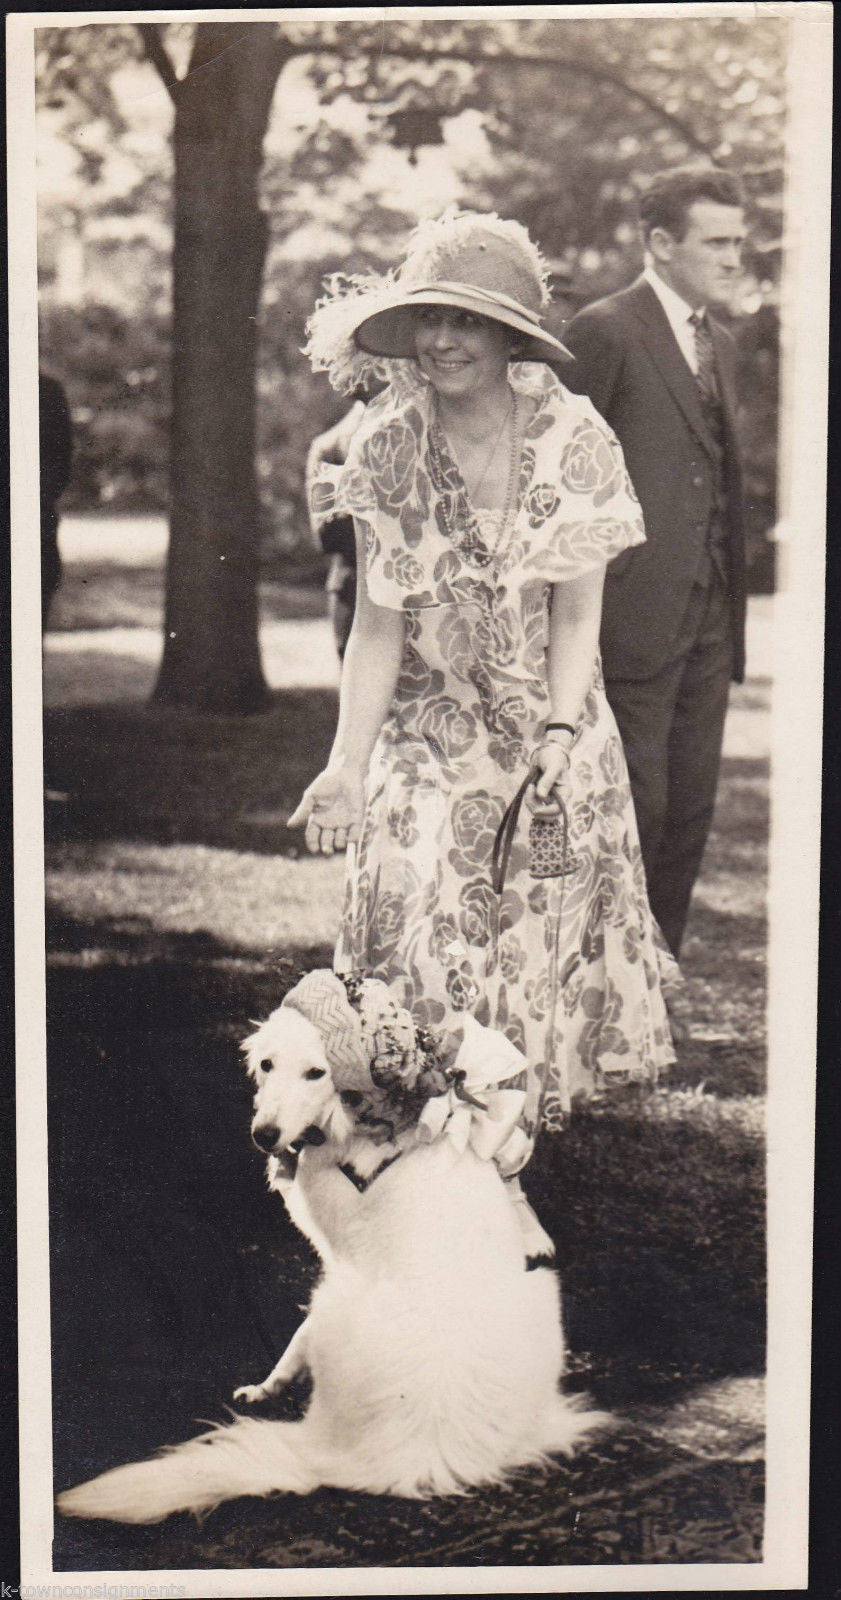 Grace Coolidge w/ Prudence Prim Presidential Dog Vintage 1920s News Press Photo - K-townConsignments